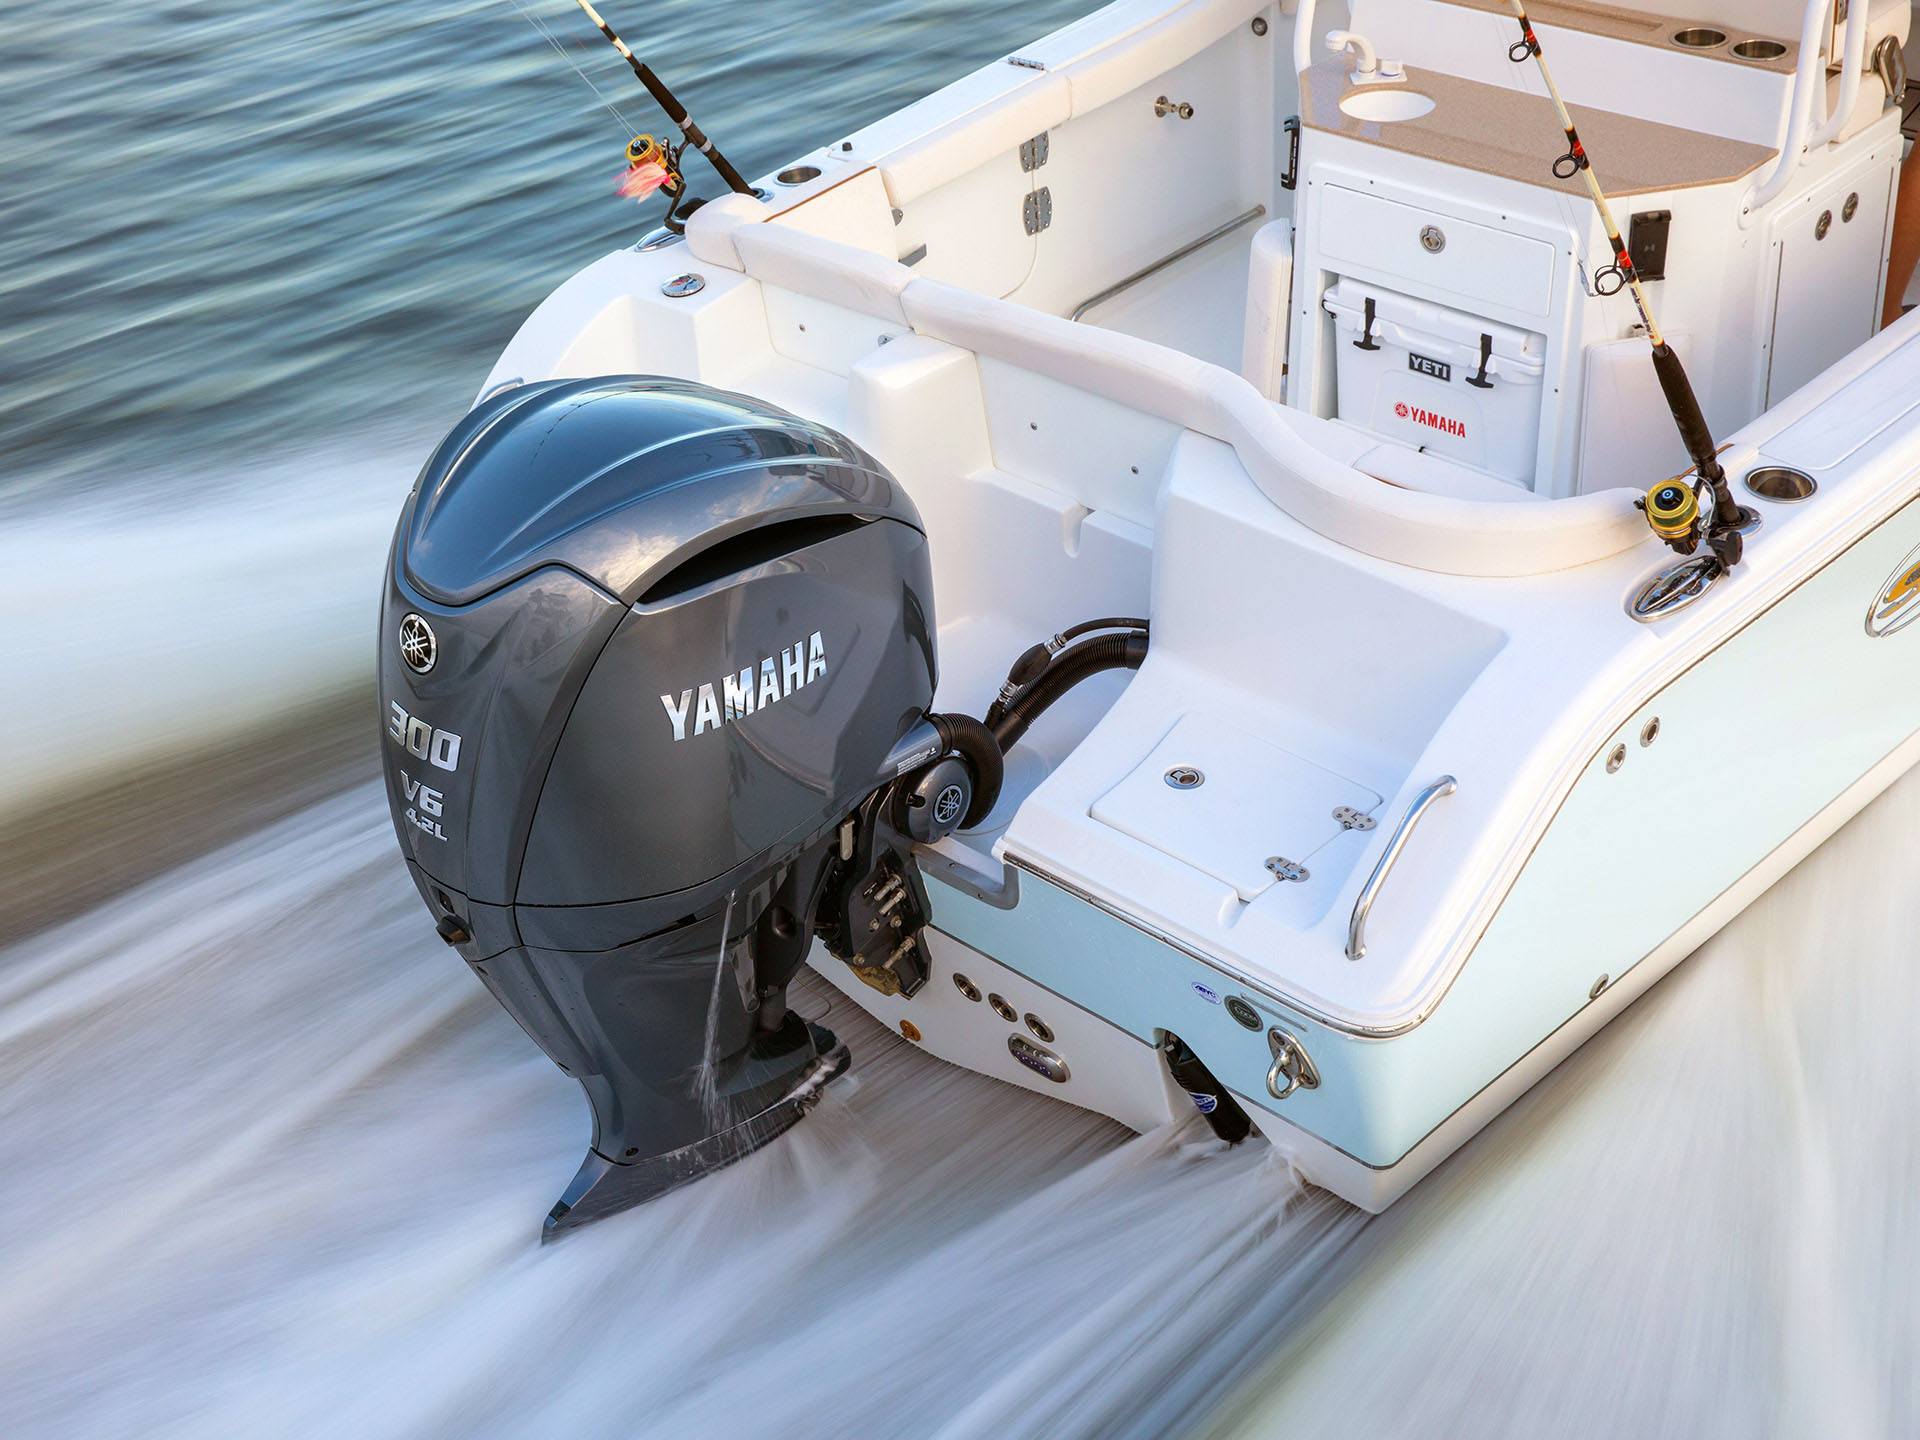 Yamaha F300 4.2L V6 Offshore 25 in. Remote Mech PT Counter Rotation in Pine Bluff, Arkansas - Photo 7